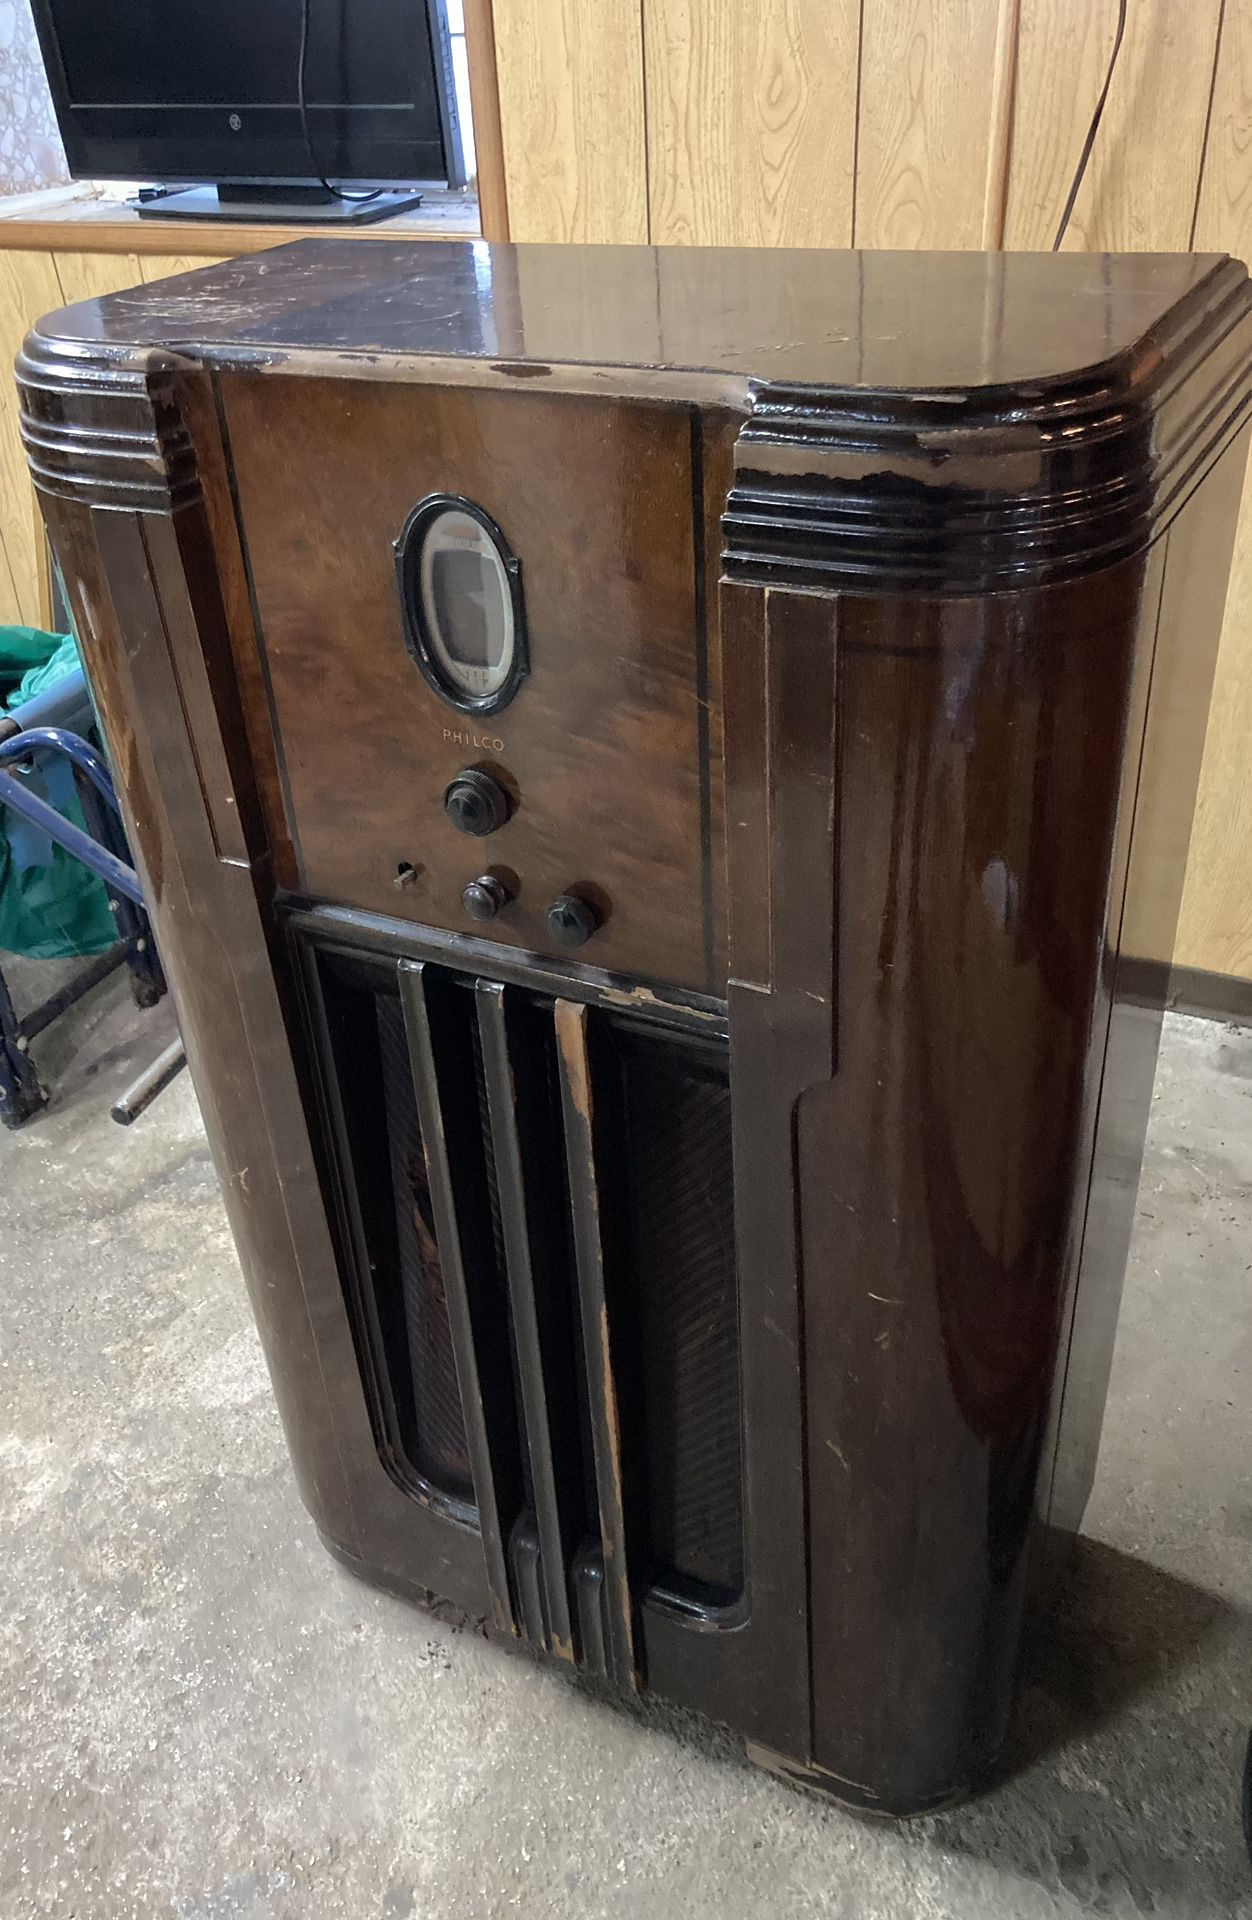 VINTAGE ANTIQUE PHILCO RADIO - Probably can be refurbished a bit